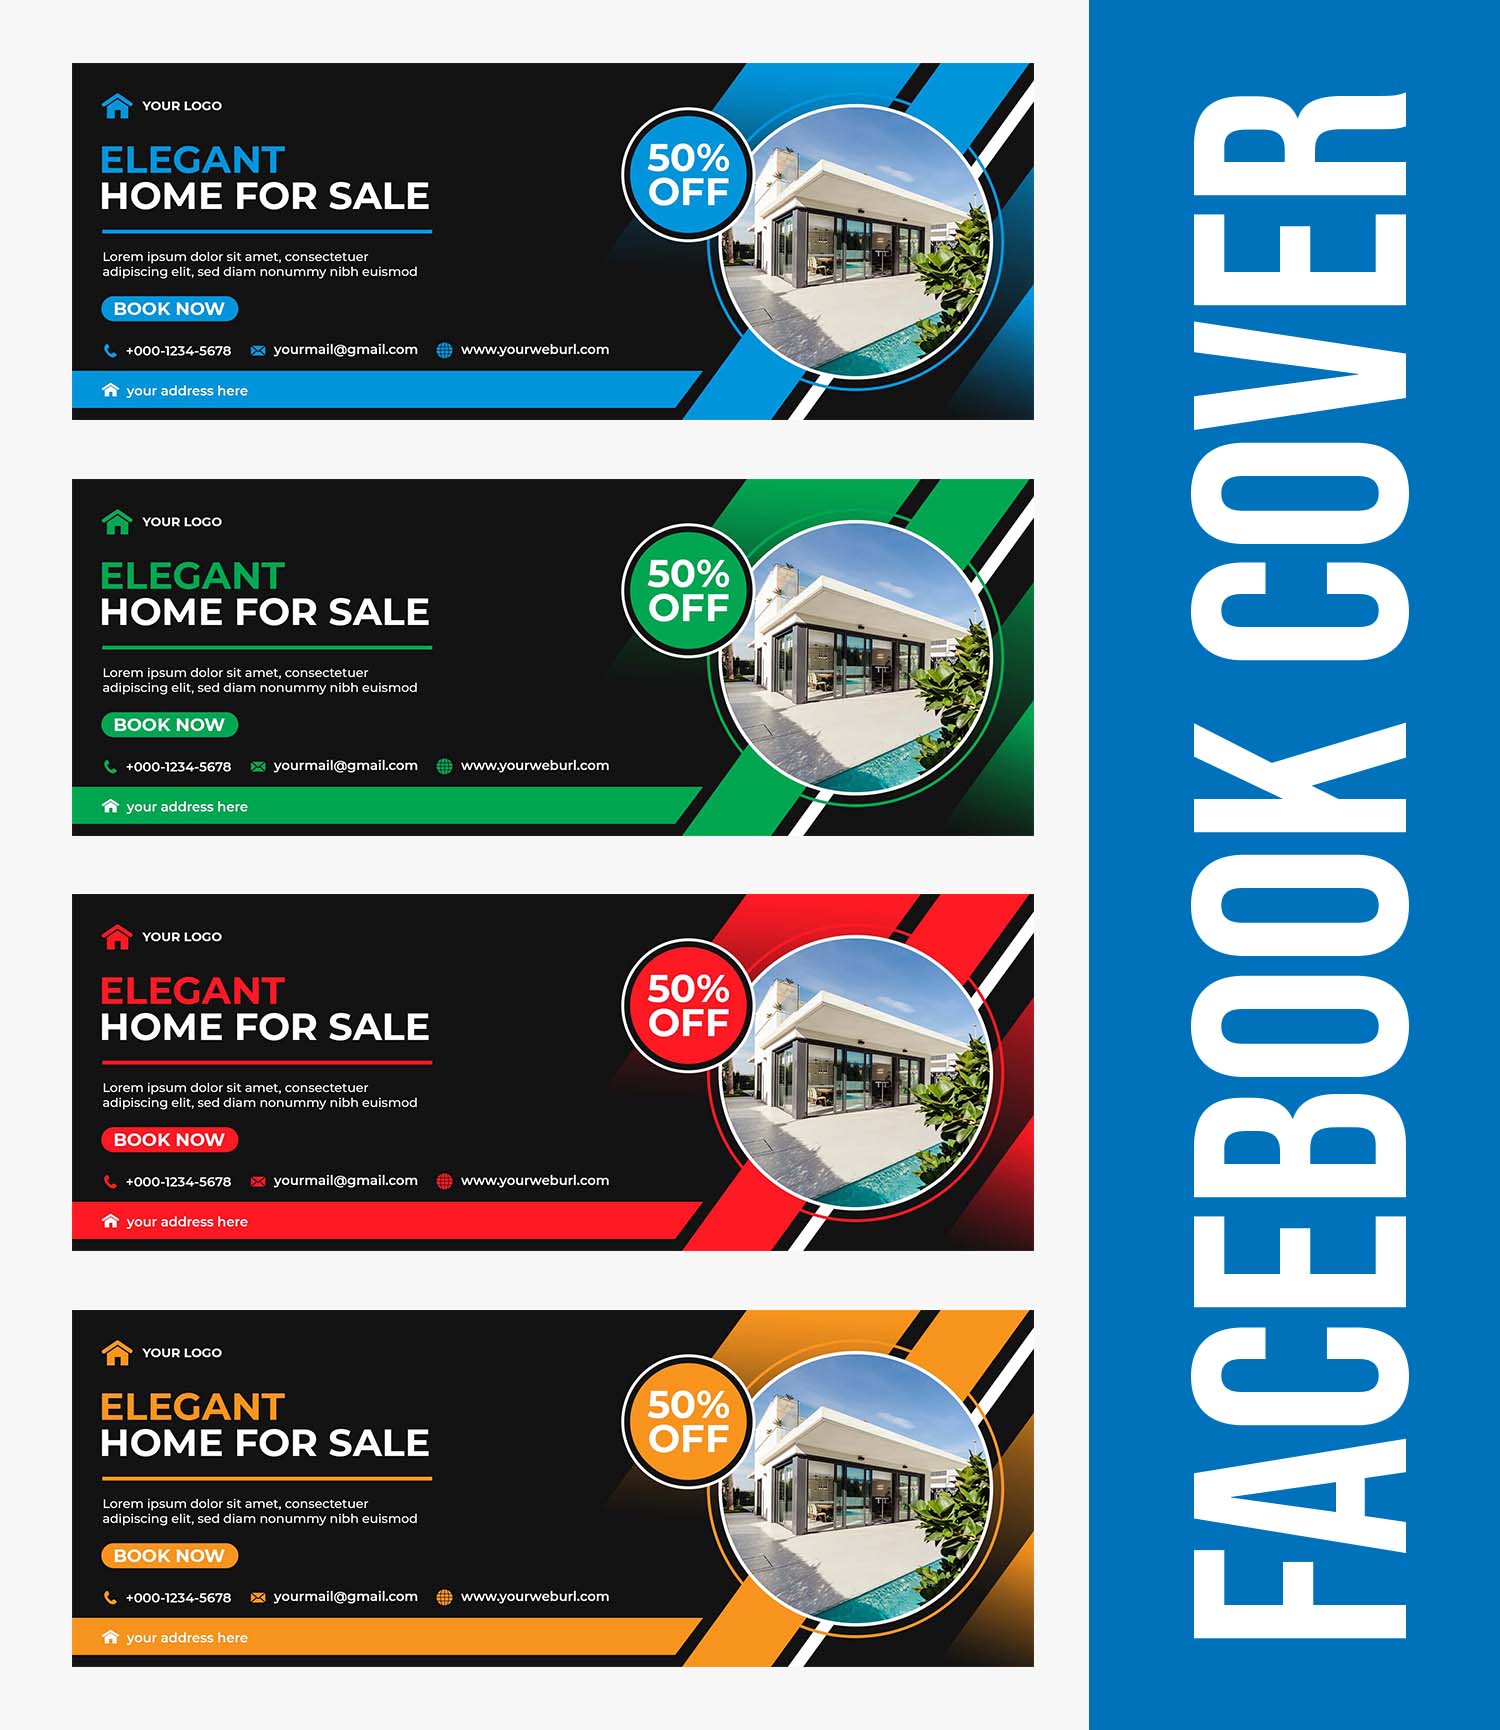 Set of three facebook banners with a house for sale.